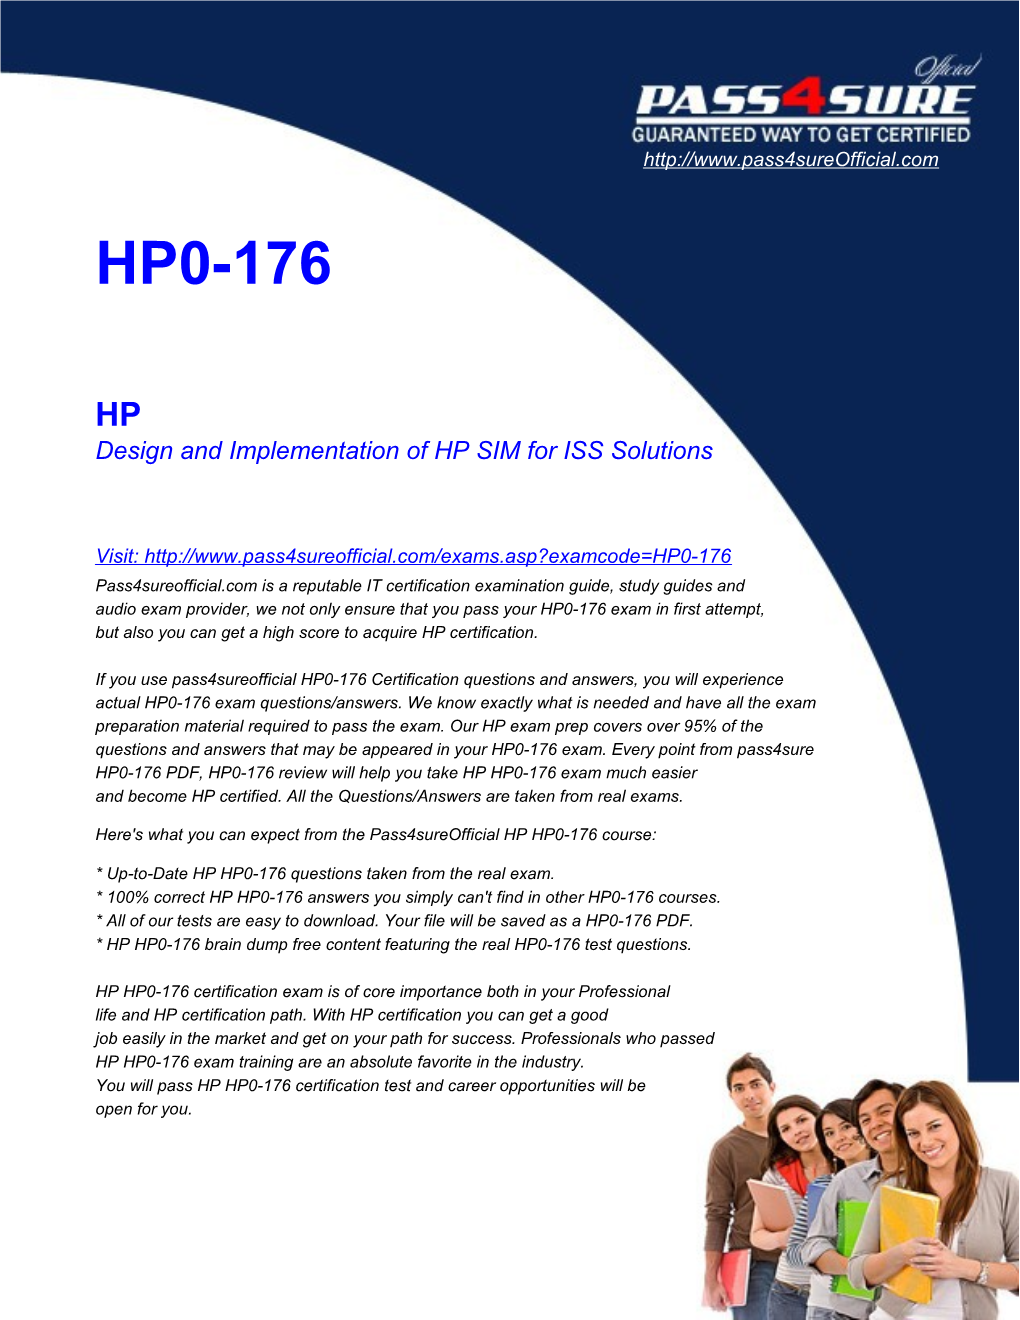 Design and Implementation of HP SIM for ISS Solutions